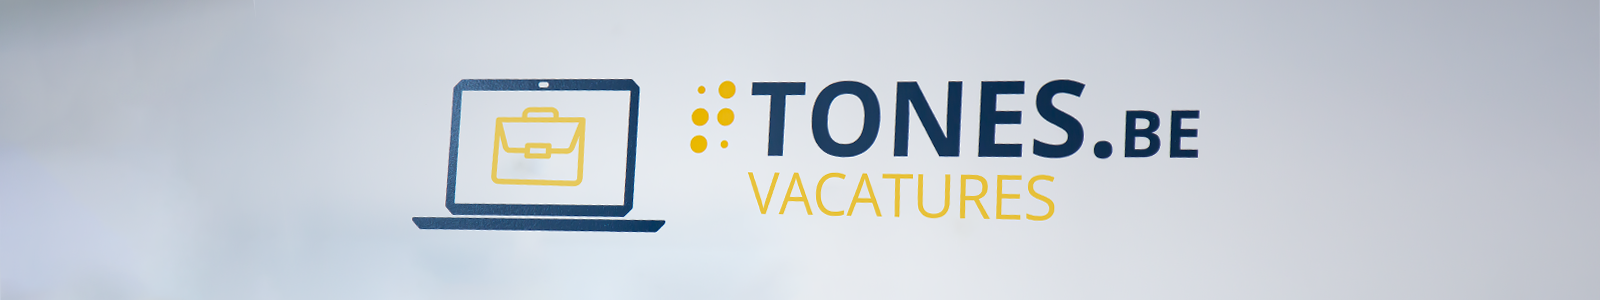 Tones-vacatures-masterpage-banner-image-1